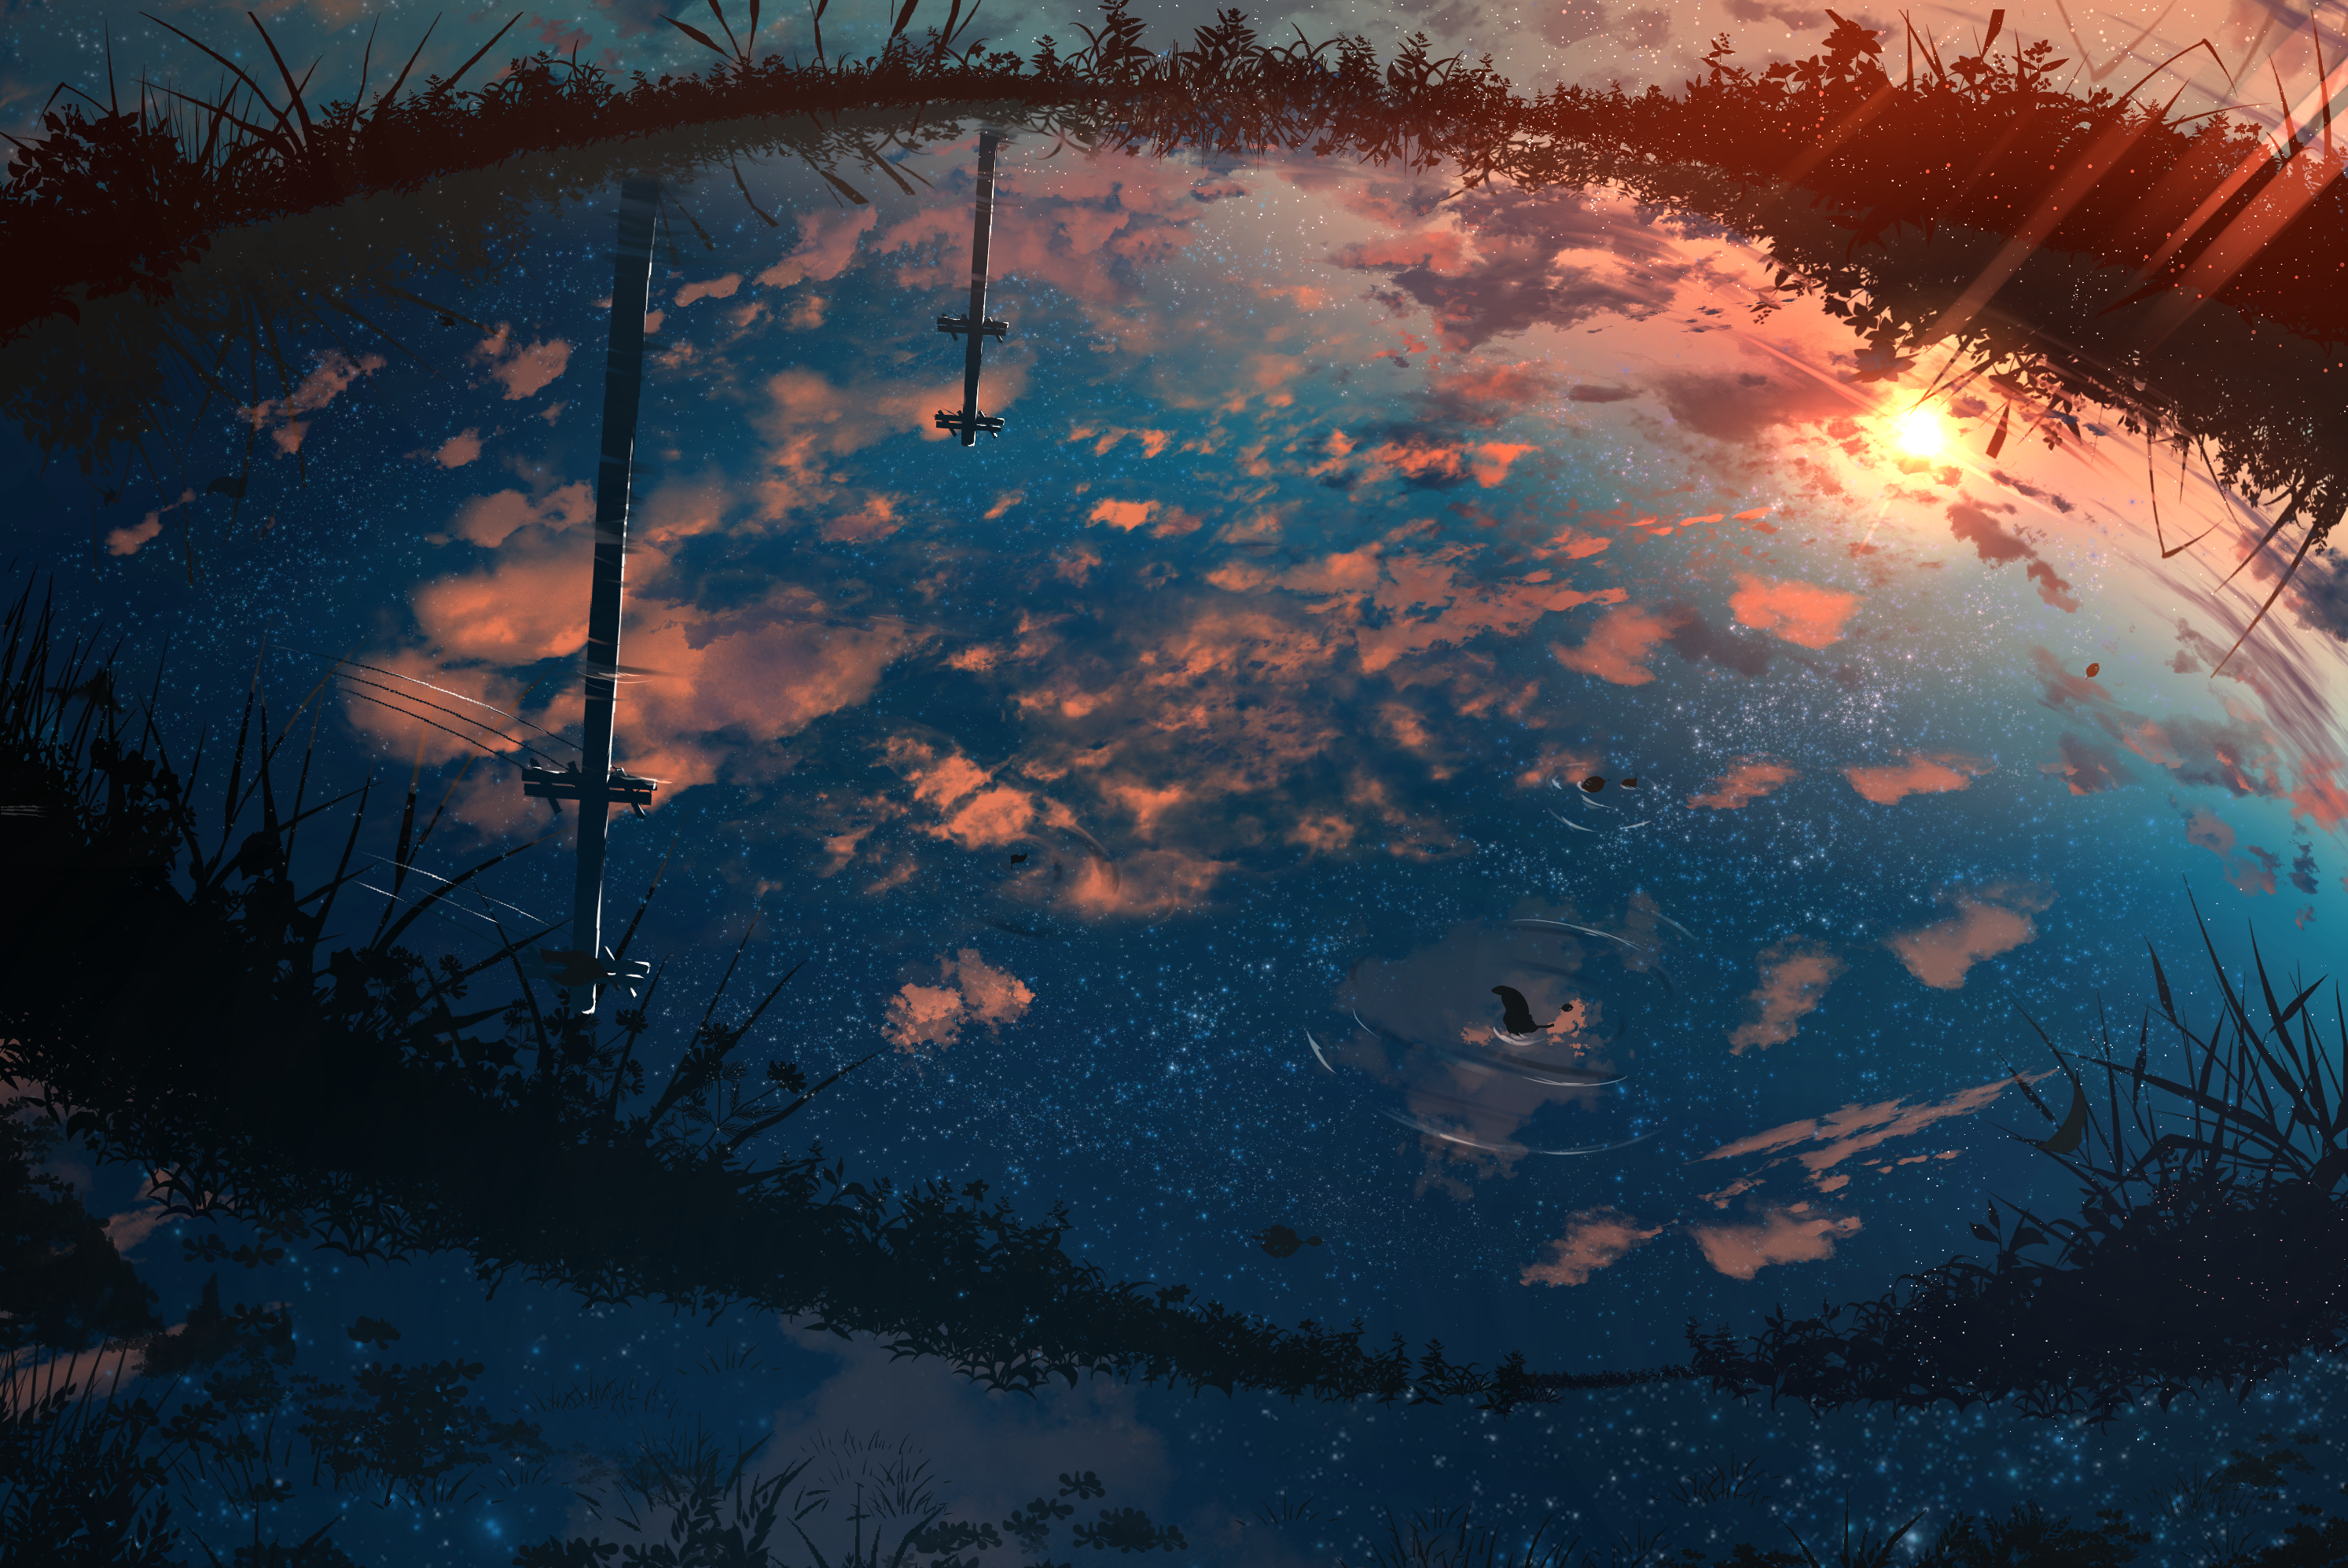 Reflection of sunset in water by ツチヤ